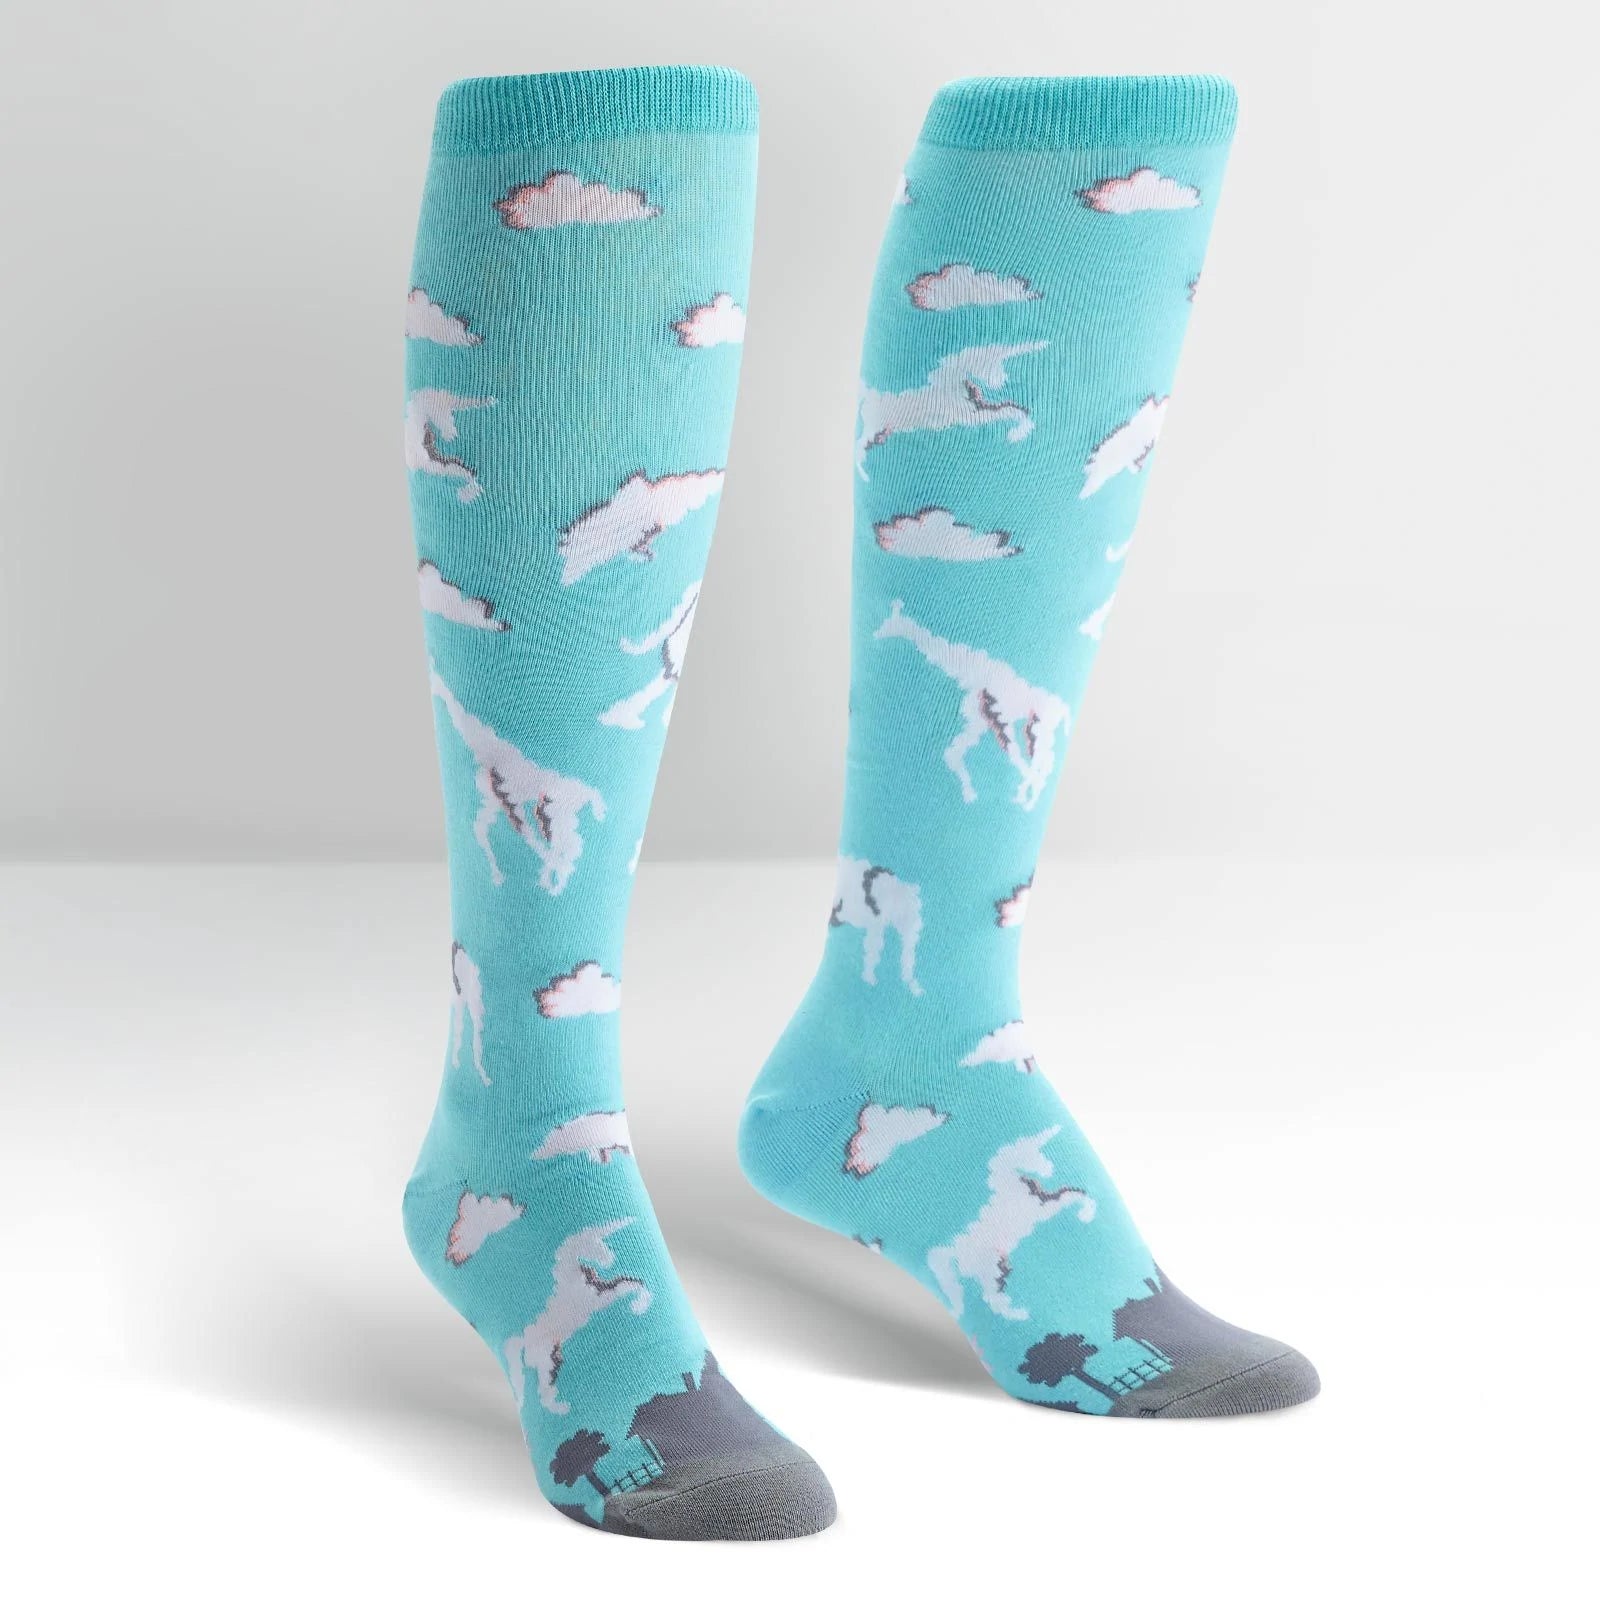 Sky blue knee high socks with a variety of animals made of clouds all over. Pink and grey high lights on the clouds. The toe of the socks depicts the silhouette of a city in grey - The Sockery